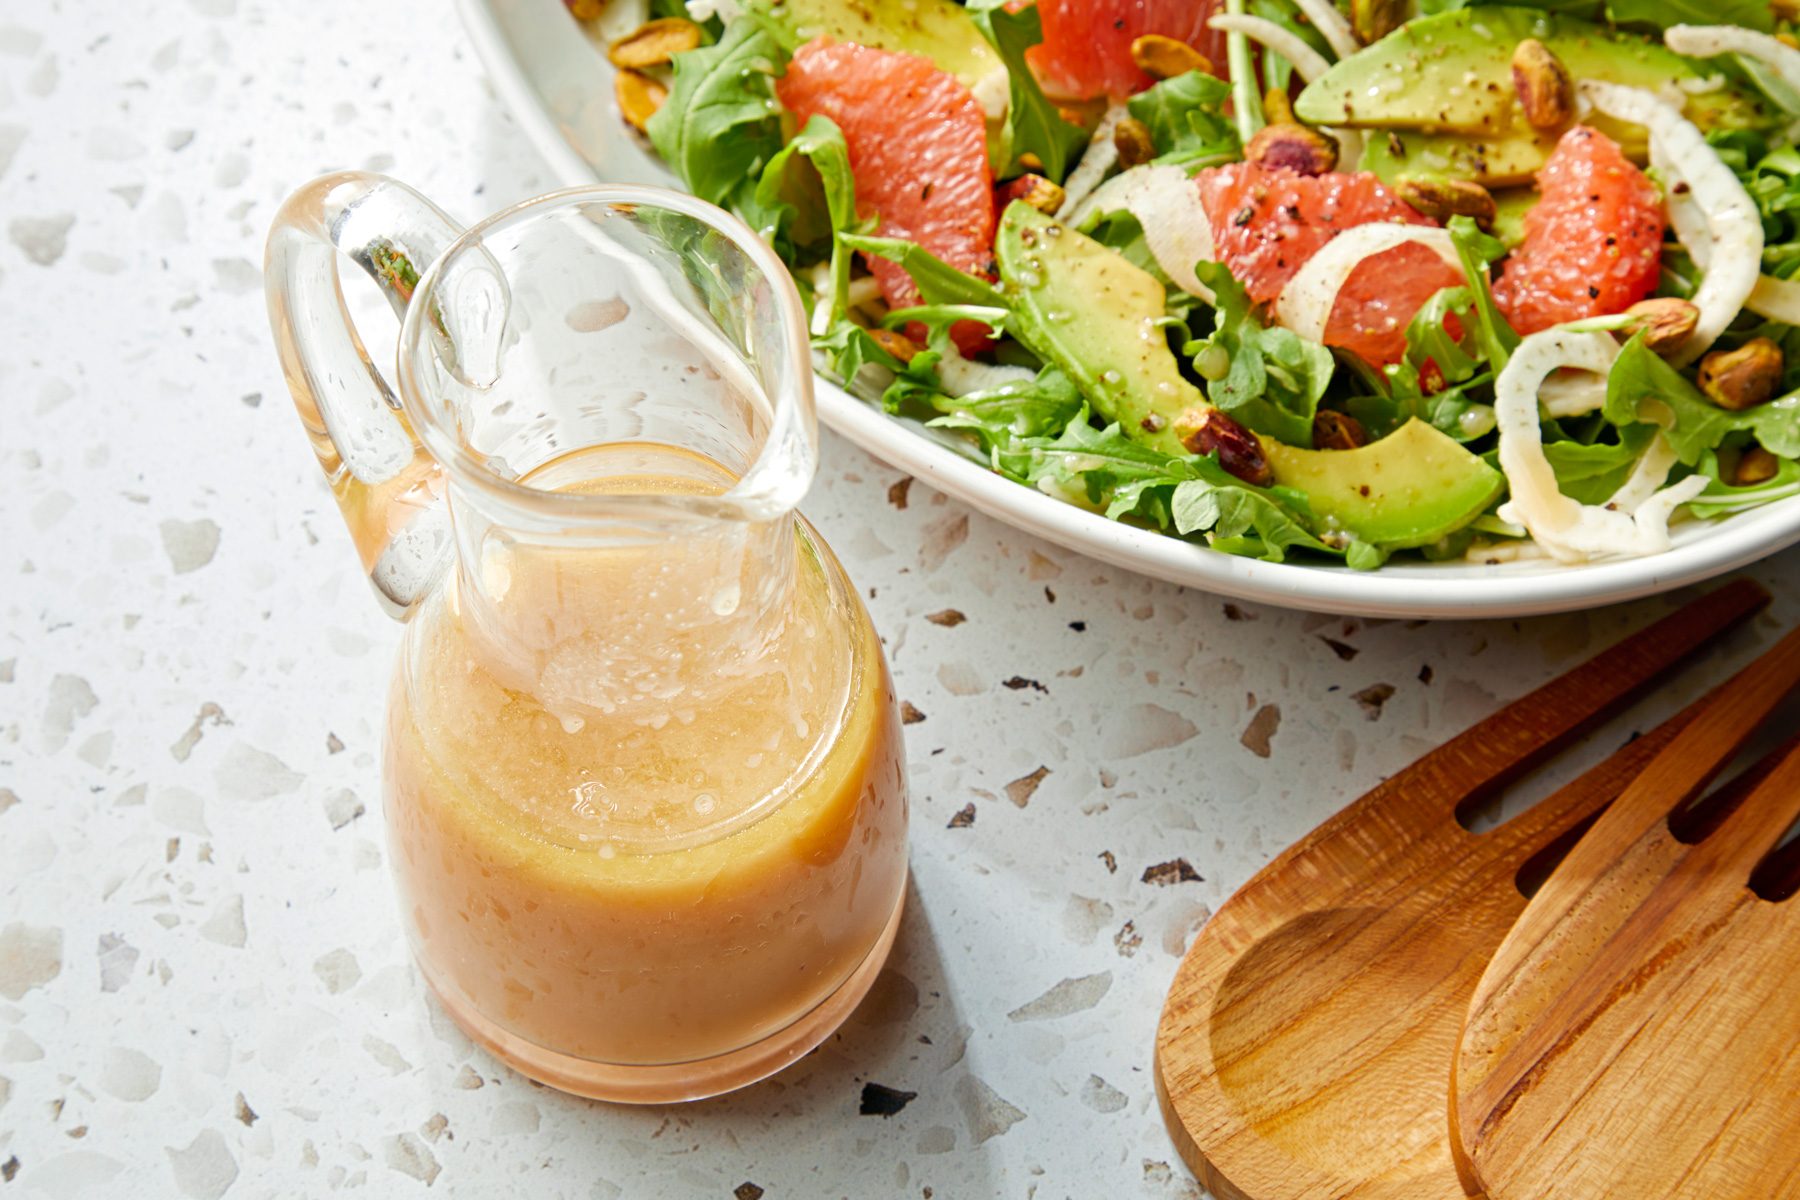 A glass pitcher of Citrus Vinaigrette dressing is next to a bowl of mixed salad